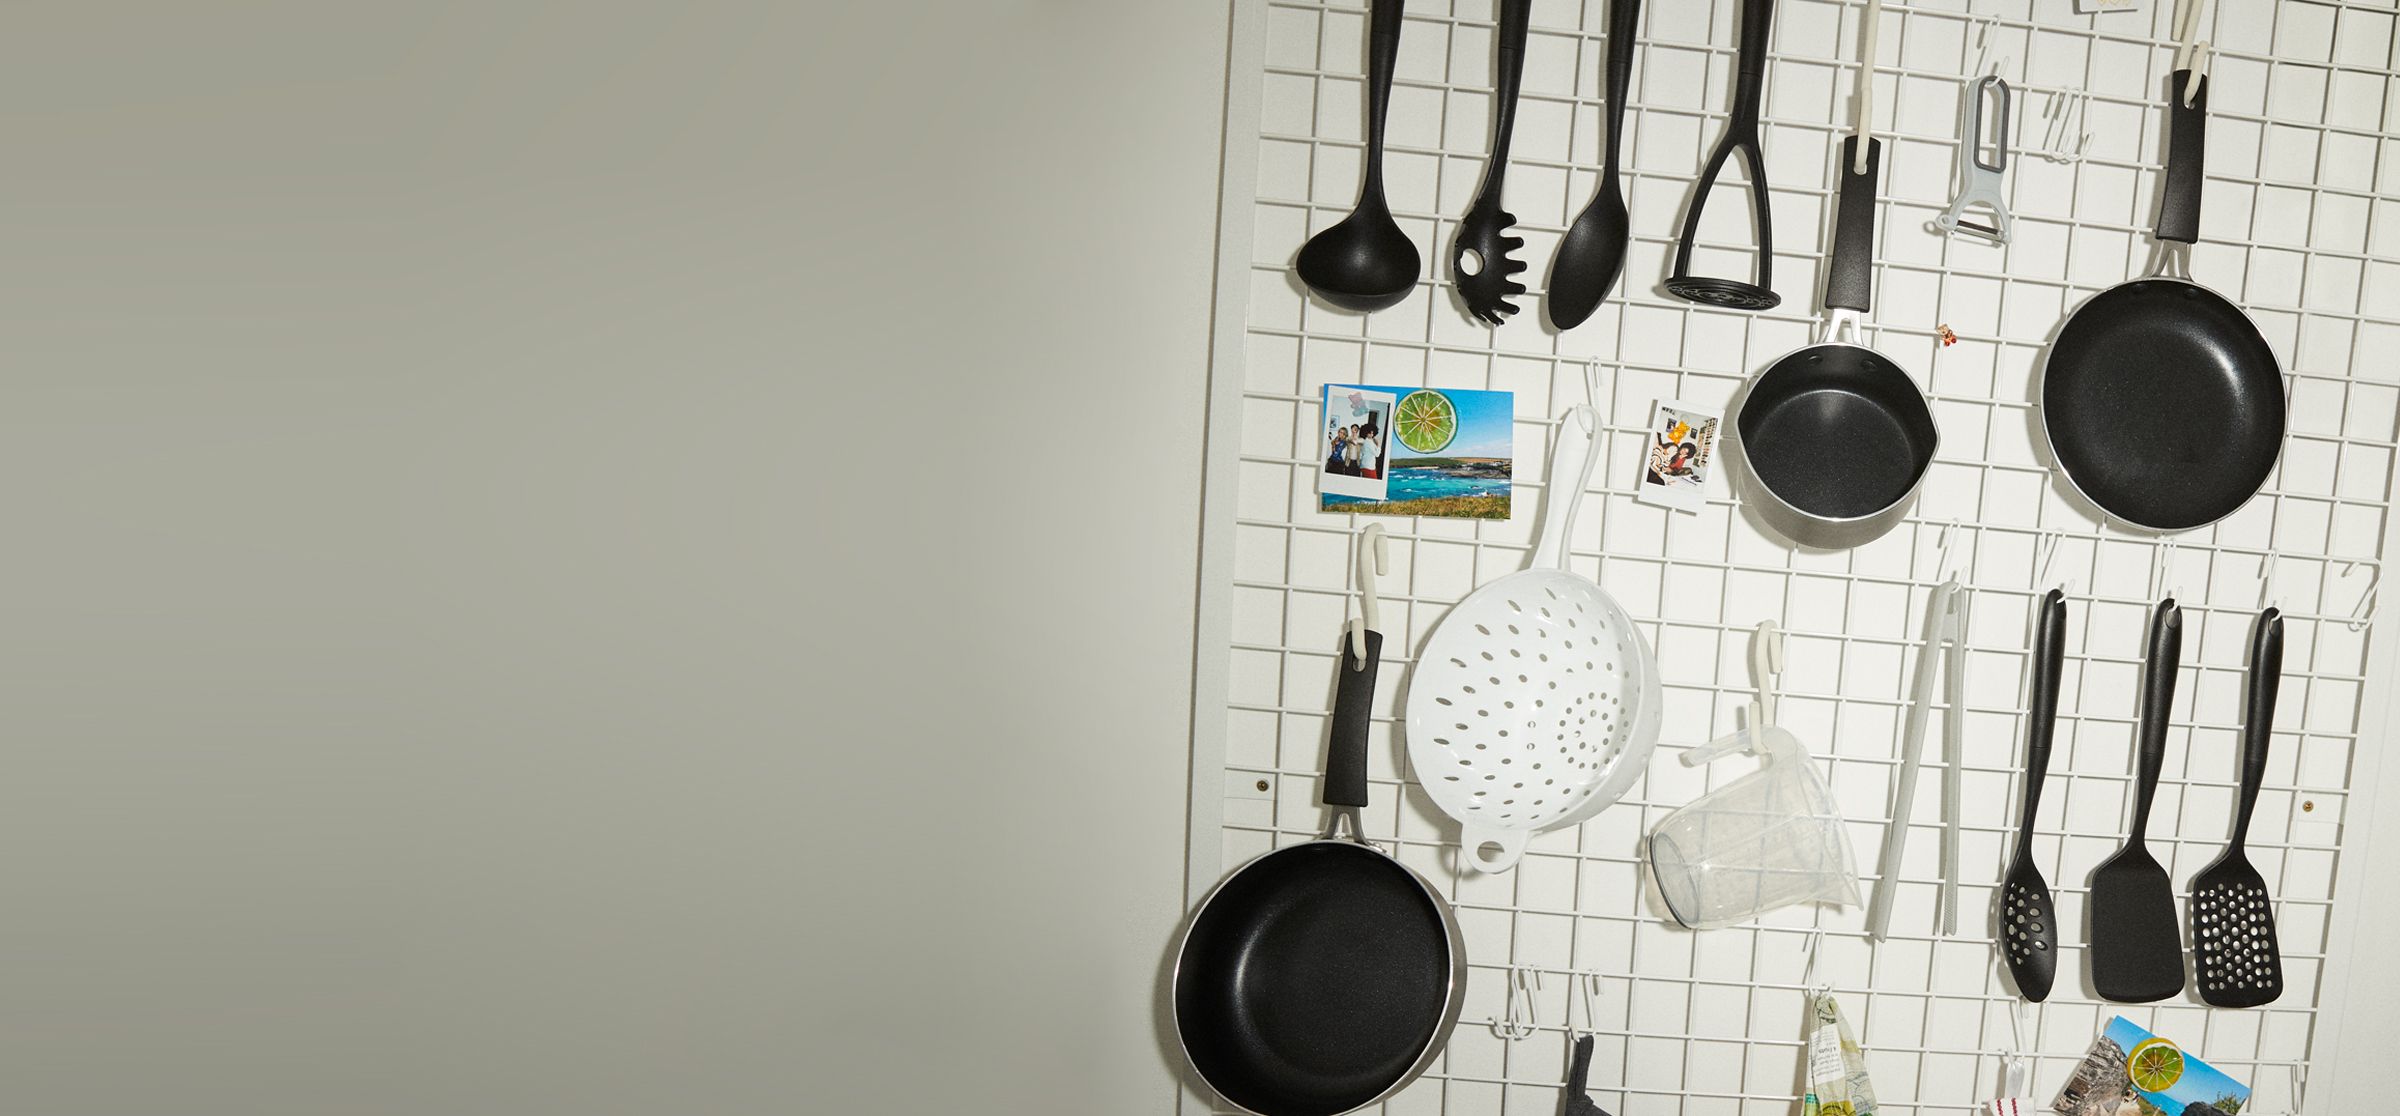 Image of lots of kitchen utensils hanging on a wall